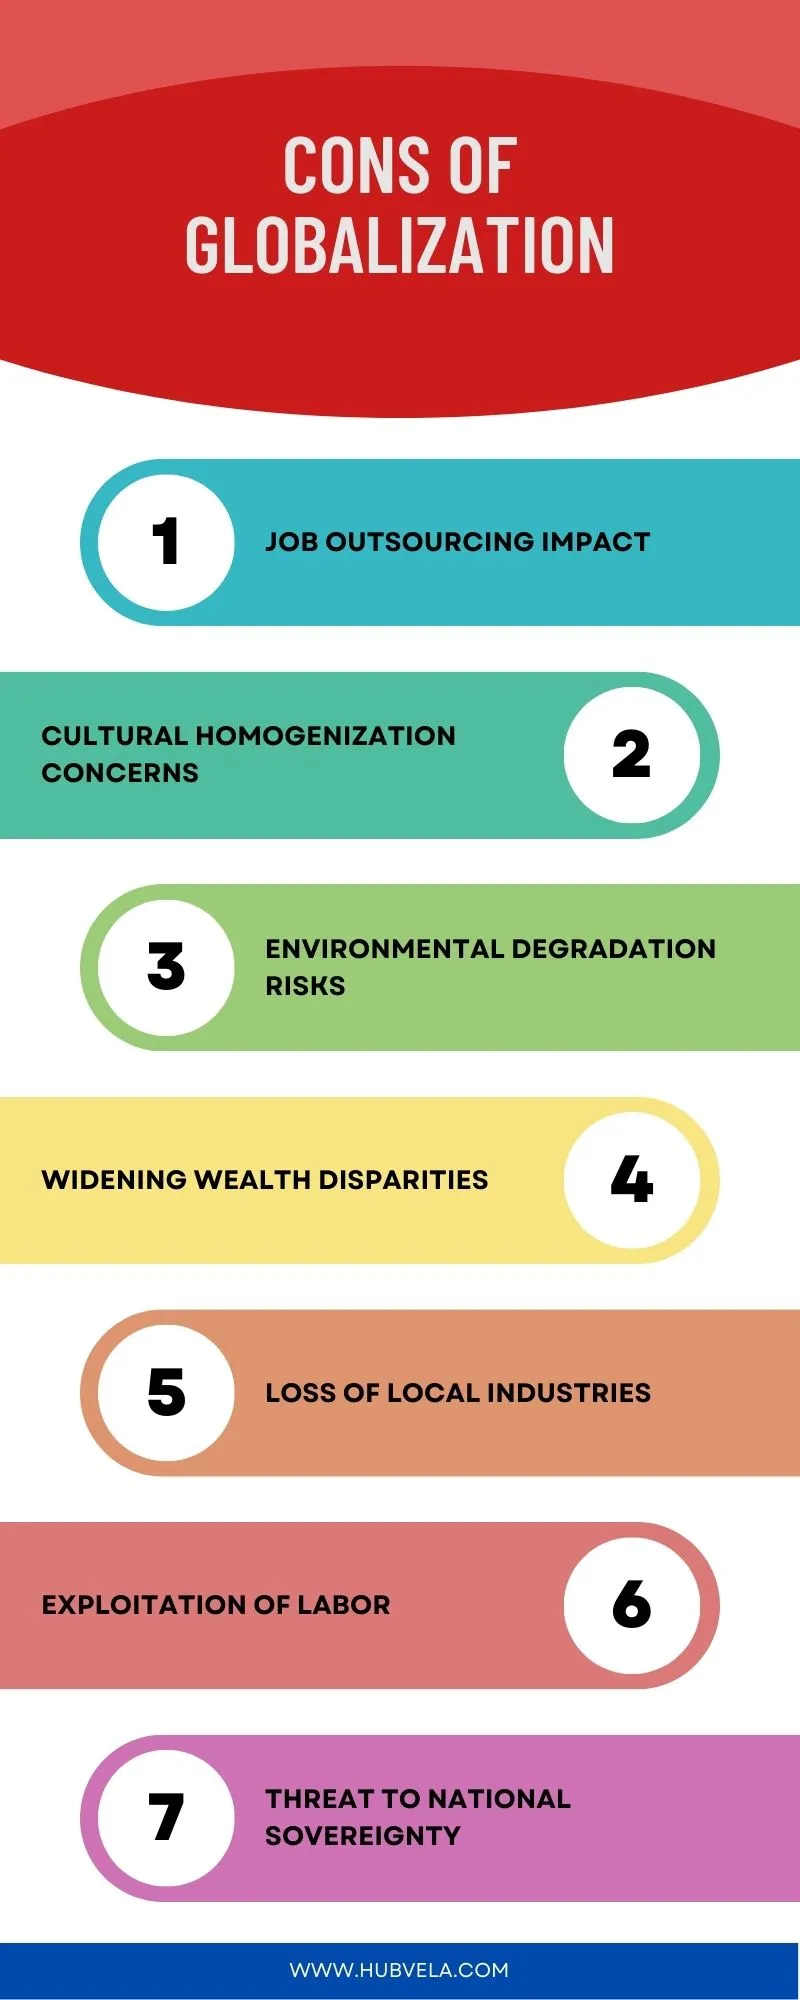 Cons of Globalization Infographic